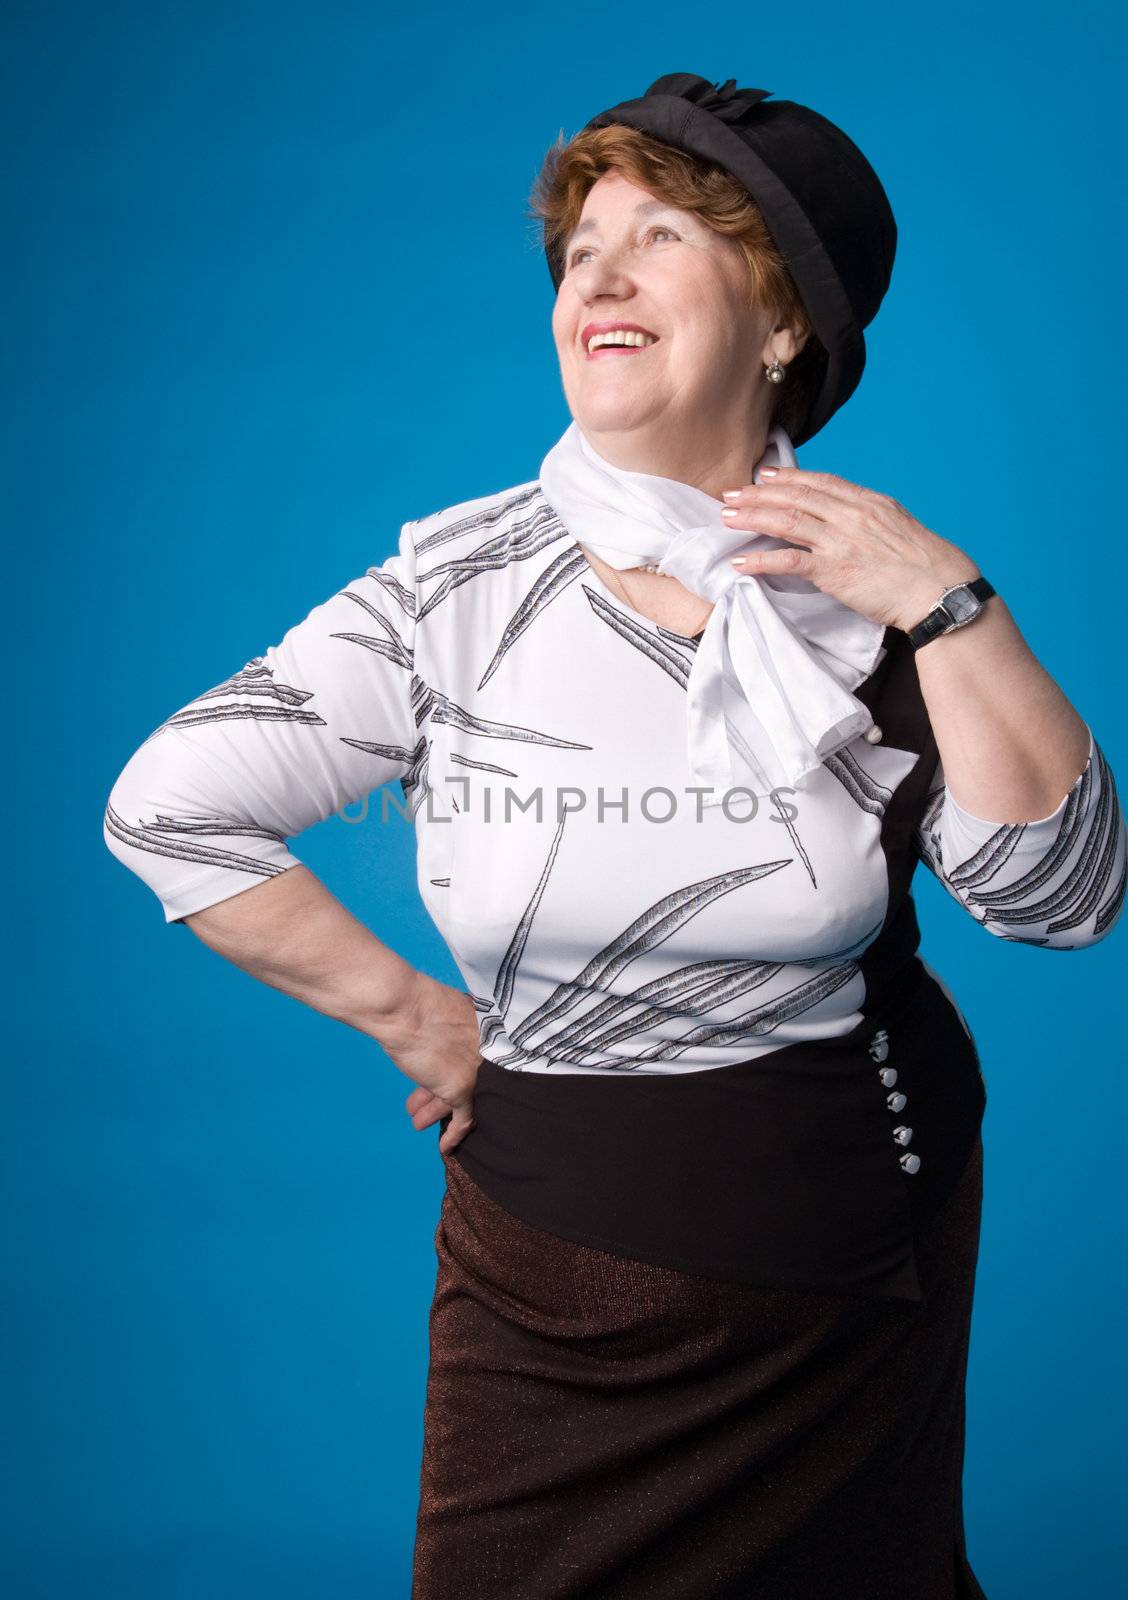 The cheerful elderly woman. by andyphoto